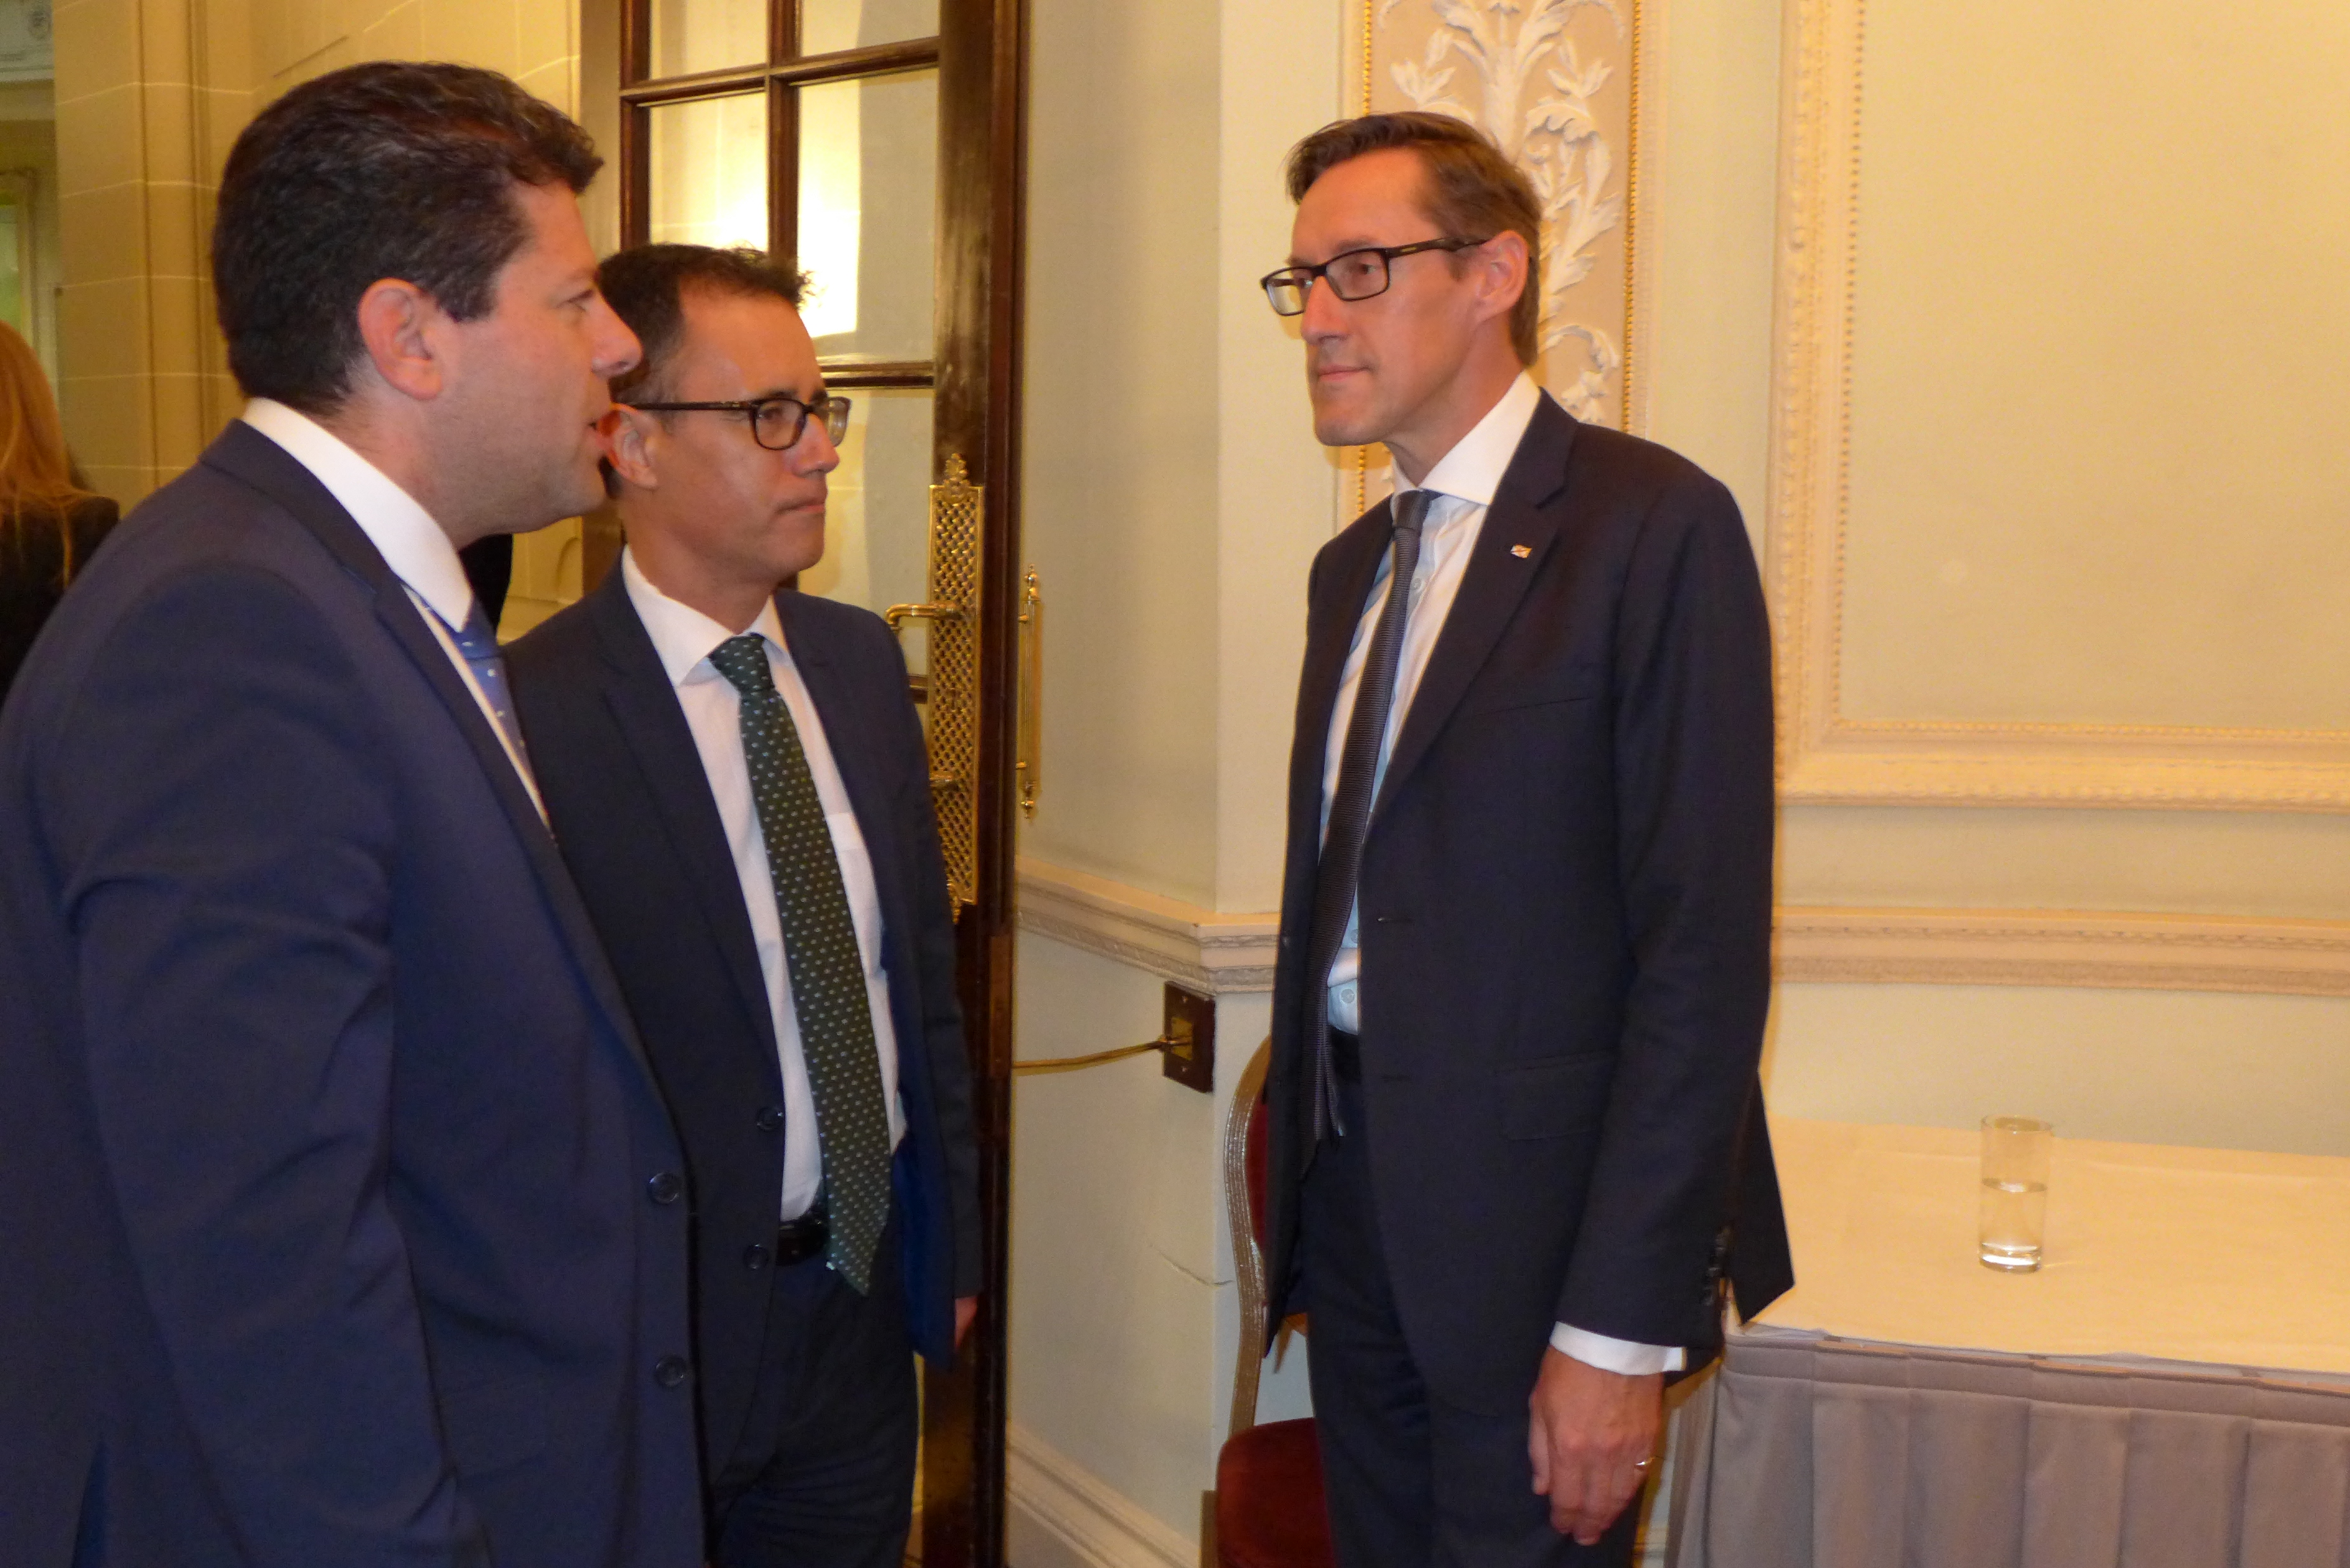 Mr Picardo and Dr Garcia welcomed by the Chief Minister of Jersey Ian Gorst